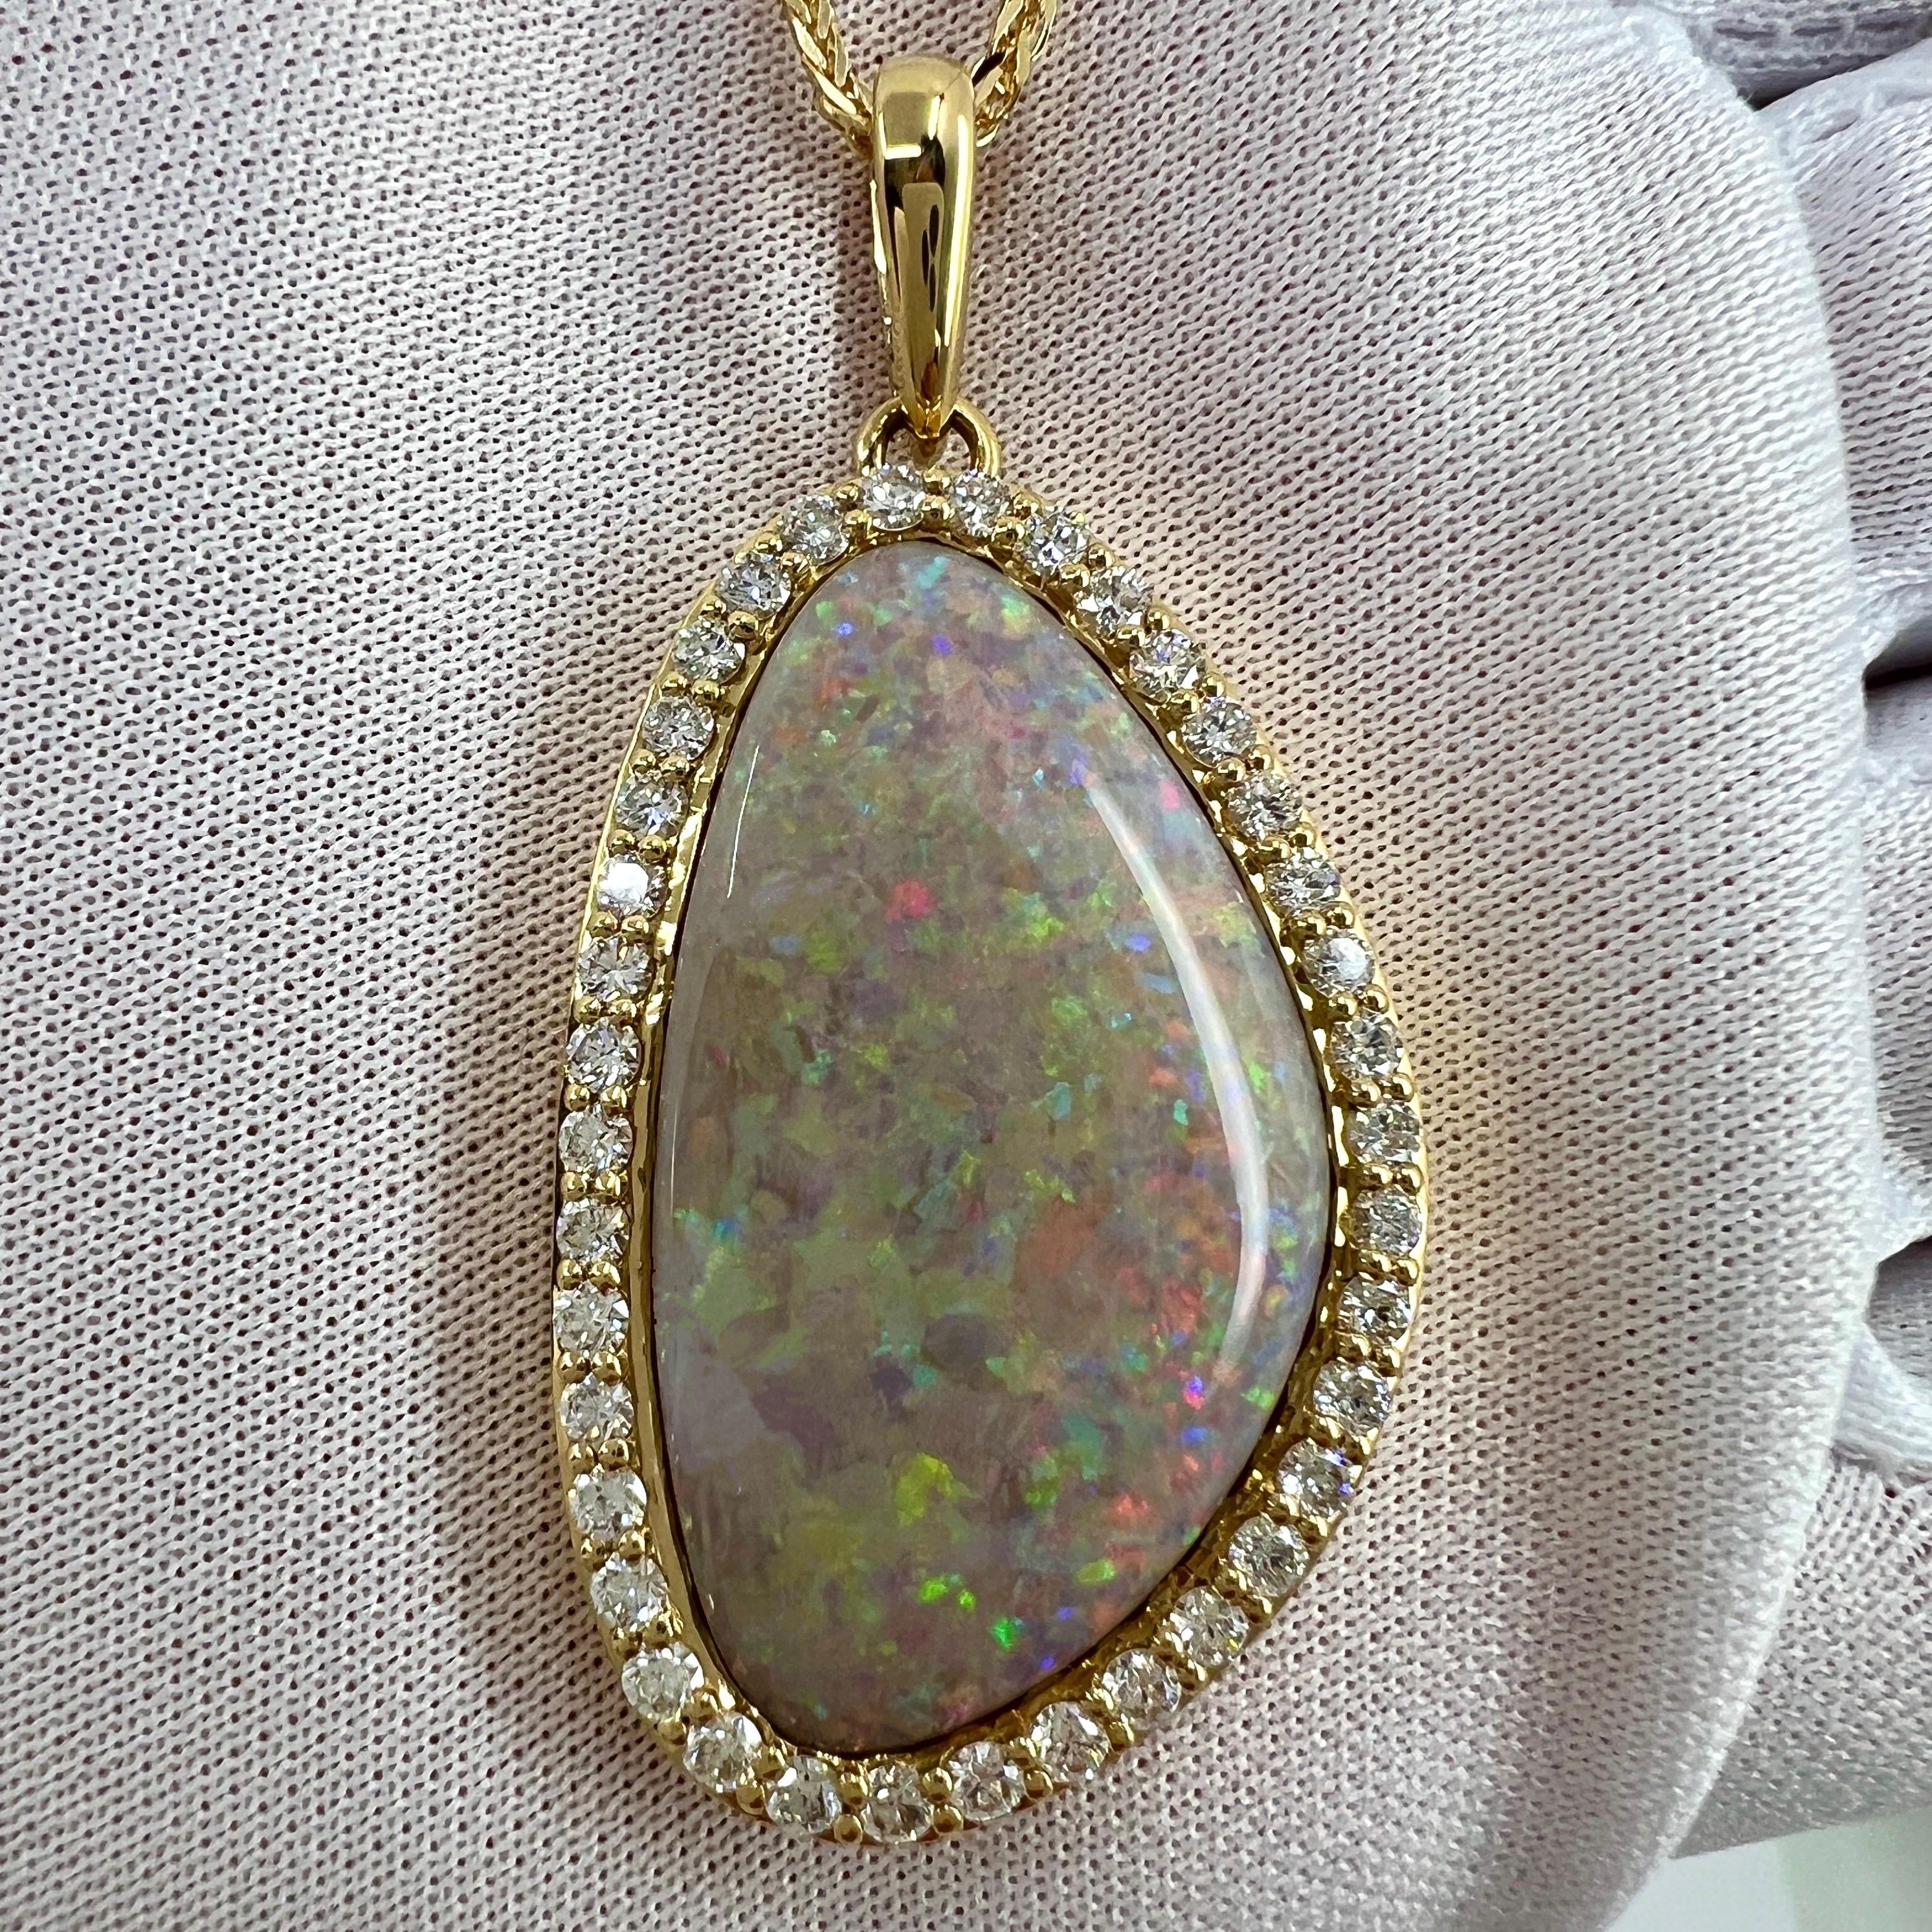 Fine Natural Australian Coober Pedy Opal & Diamond 18k Yellow Gold Pendant Necklace.

Large 20 Carat opal with beautiful play of colour, lots of colour flashes under direct light. Blues, greens, oranges, yellow, purple, reds... this stone is filled